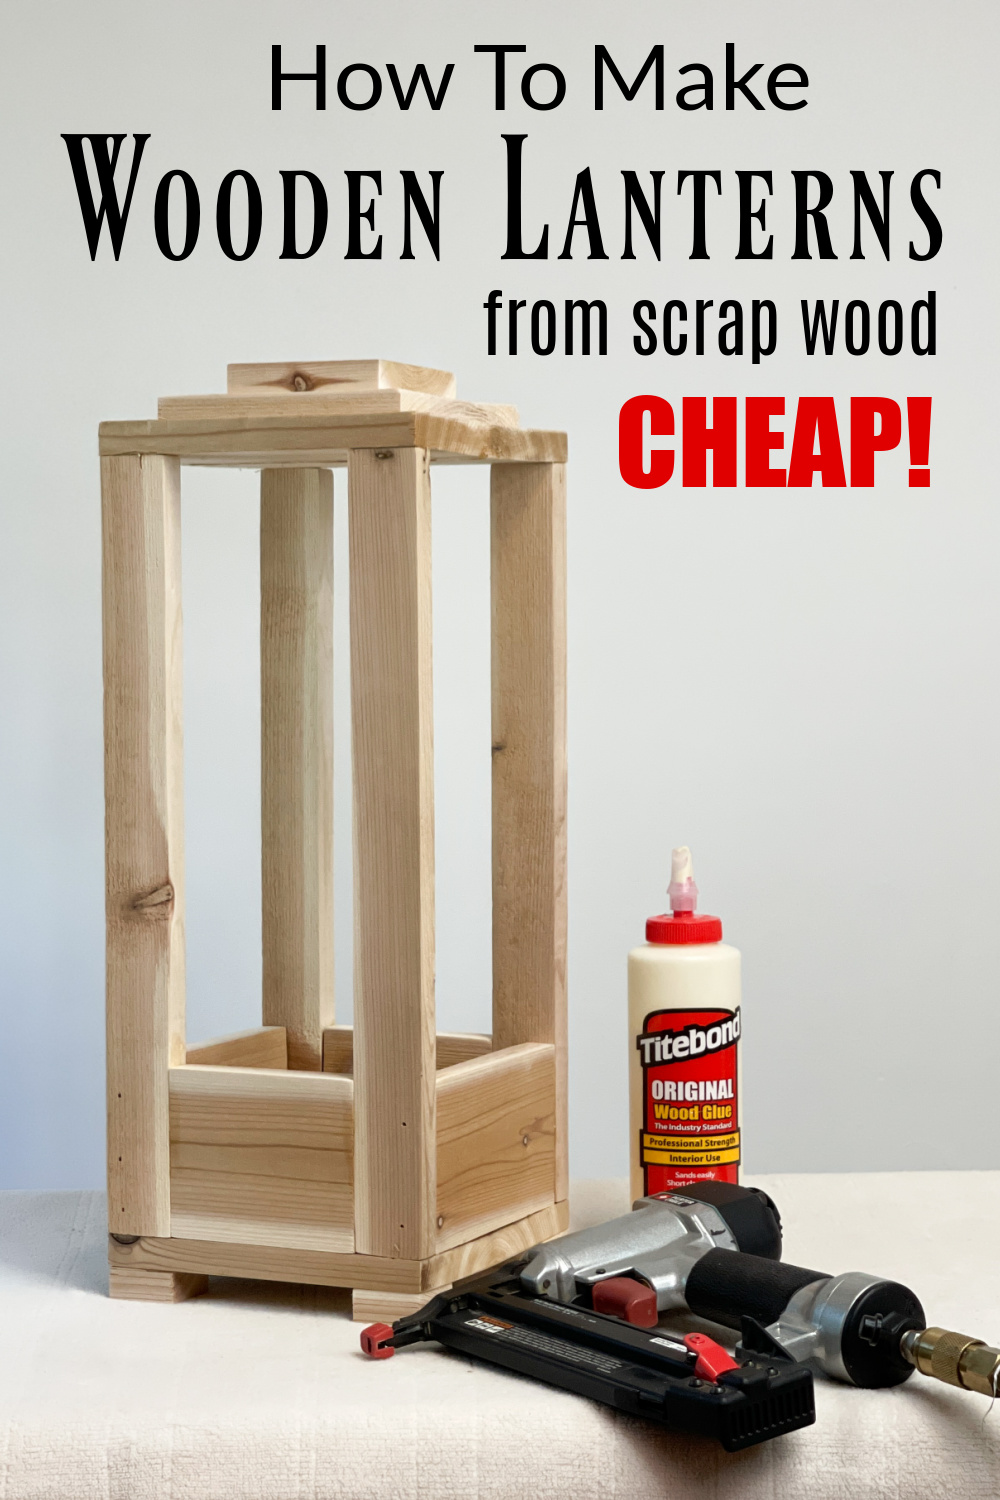 How To Turn Scrap Wood Into Gorgeous DIY Wooden Lanterns (Tutorial)